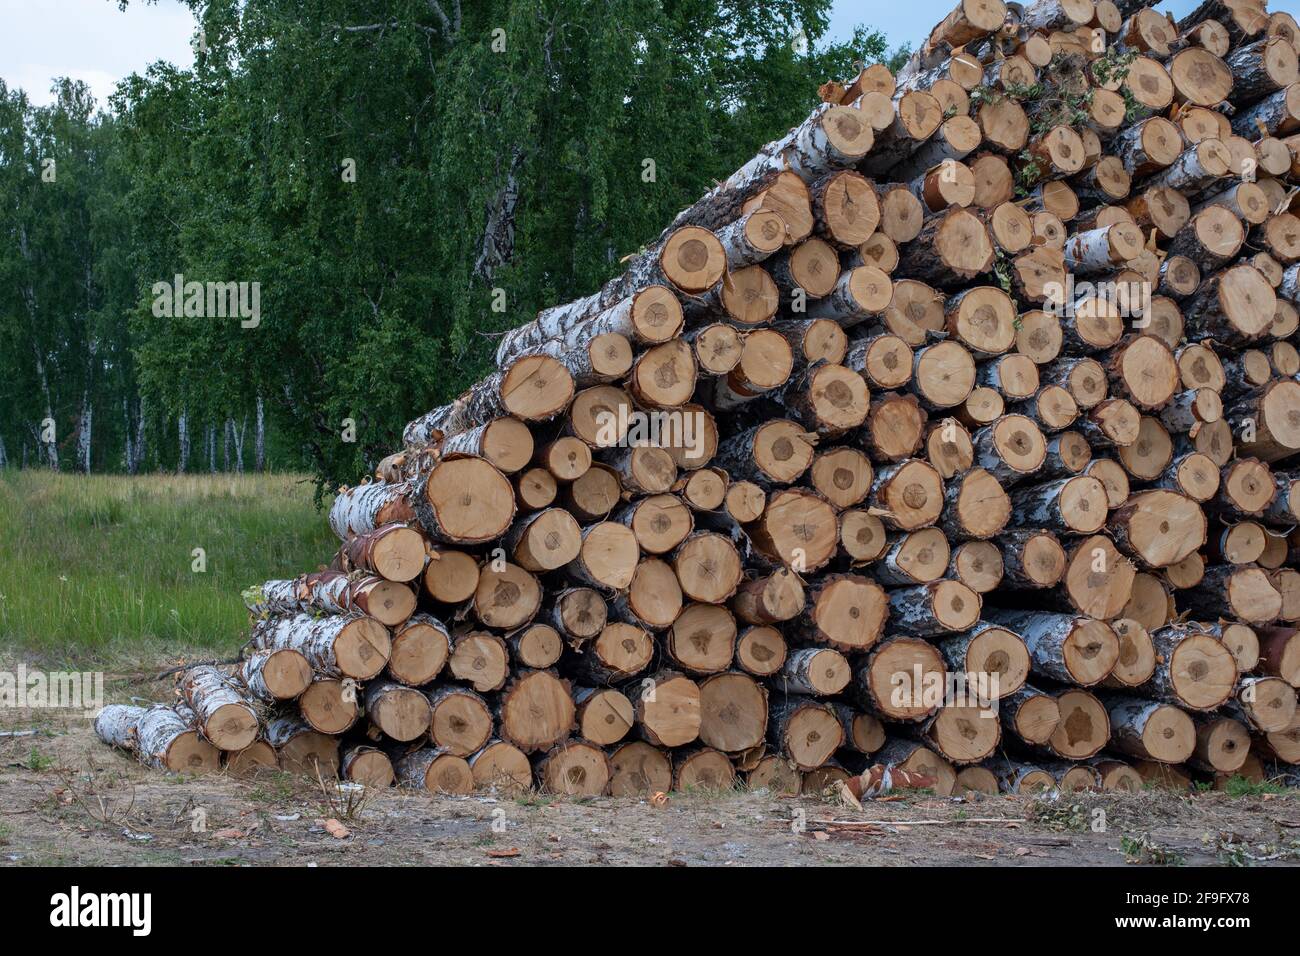 Felled tree trunks. Cut firewood, birch tree trunks stacked in piles. Illegal deforestation. Ecological catastrophy. Stock Photo